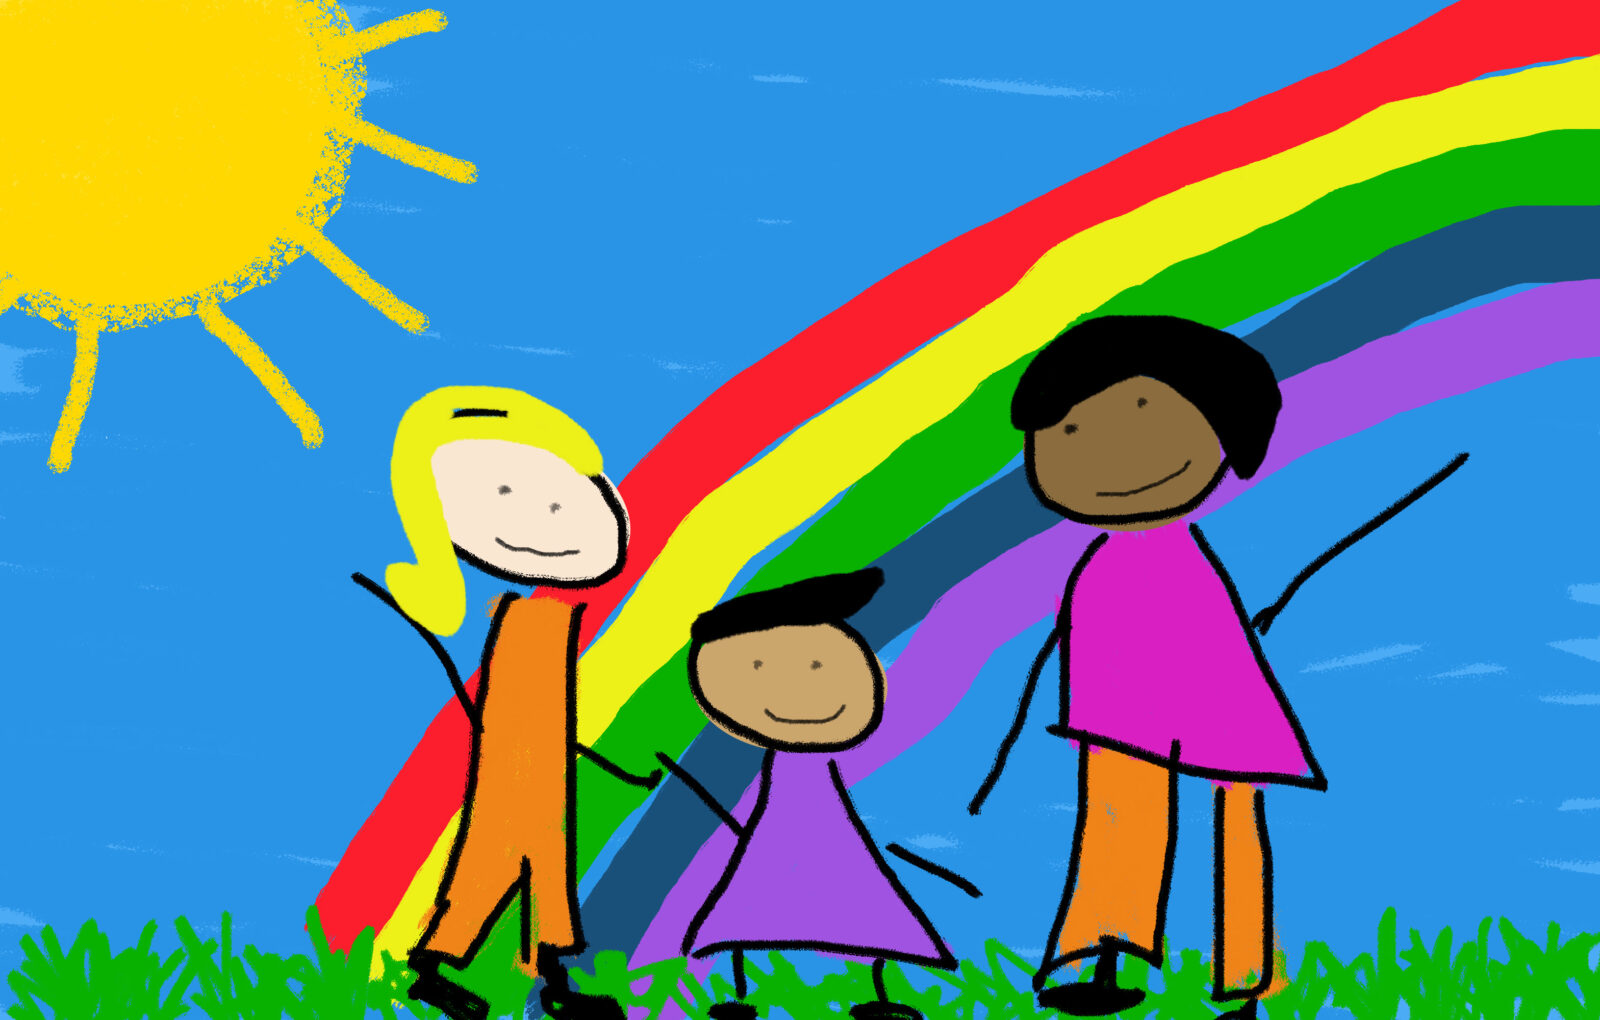 A childlike illustration showing a same-sex, multi-cultural family with their child. The sun shines and a rainbow arcs down behind them as they stand smiling and waving to the viewer.